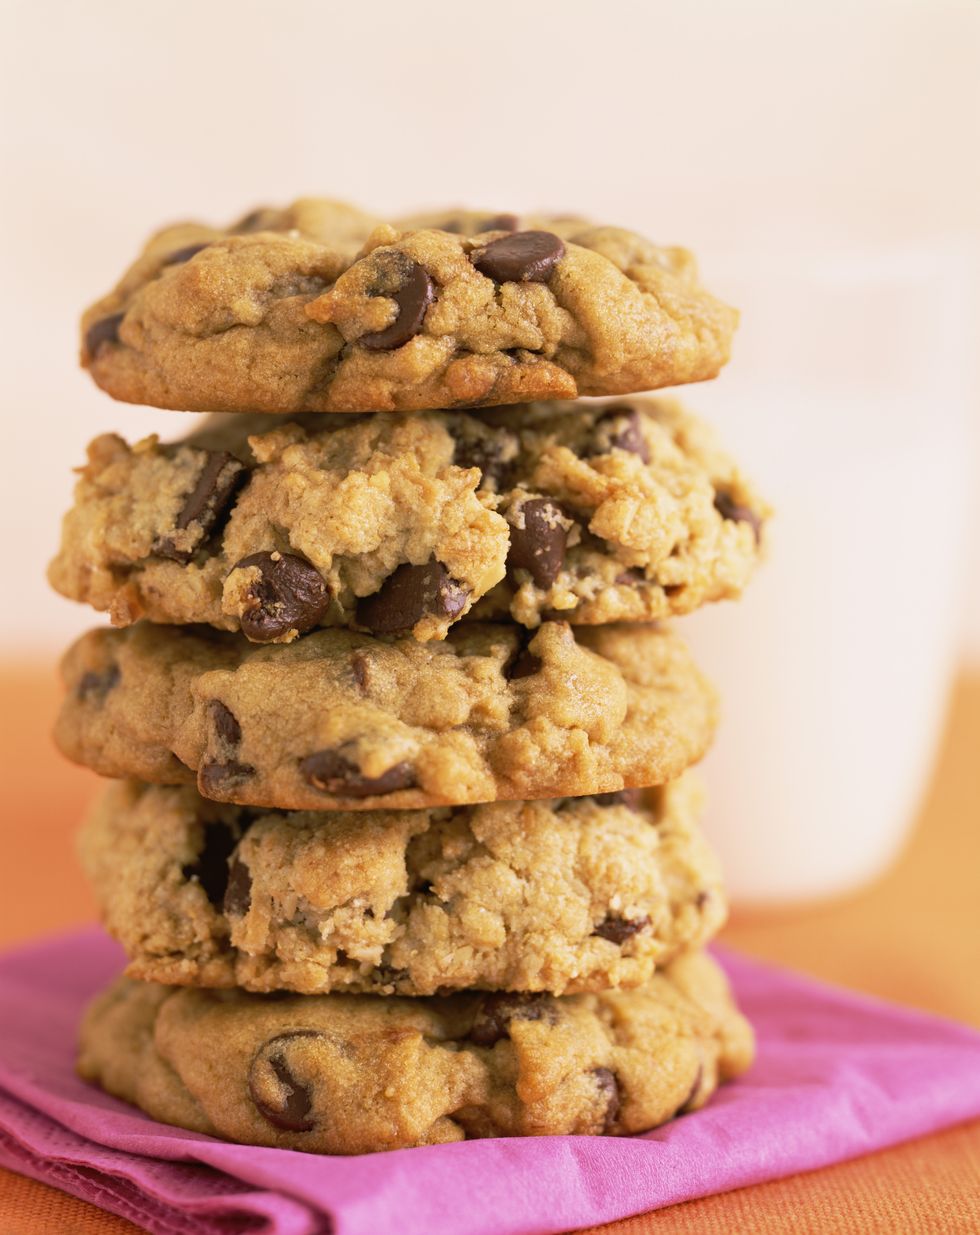 Stack of chocolate chip and oatmeal cookies